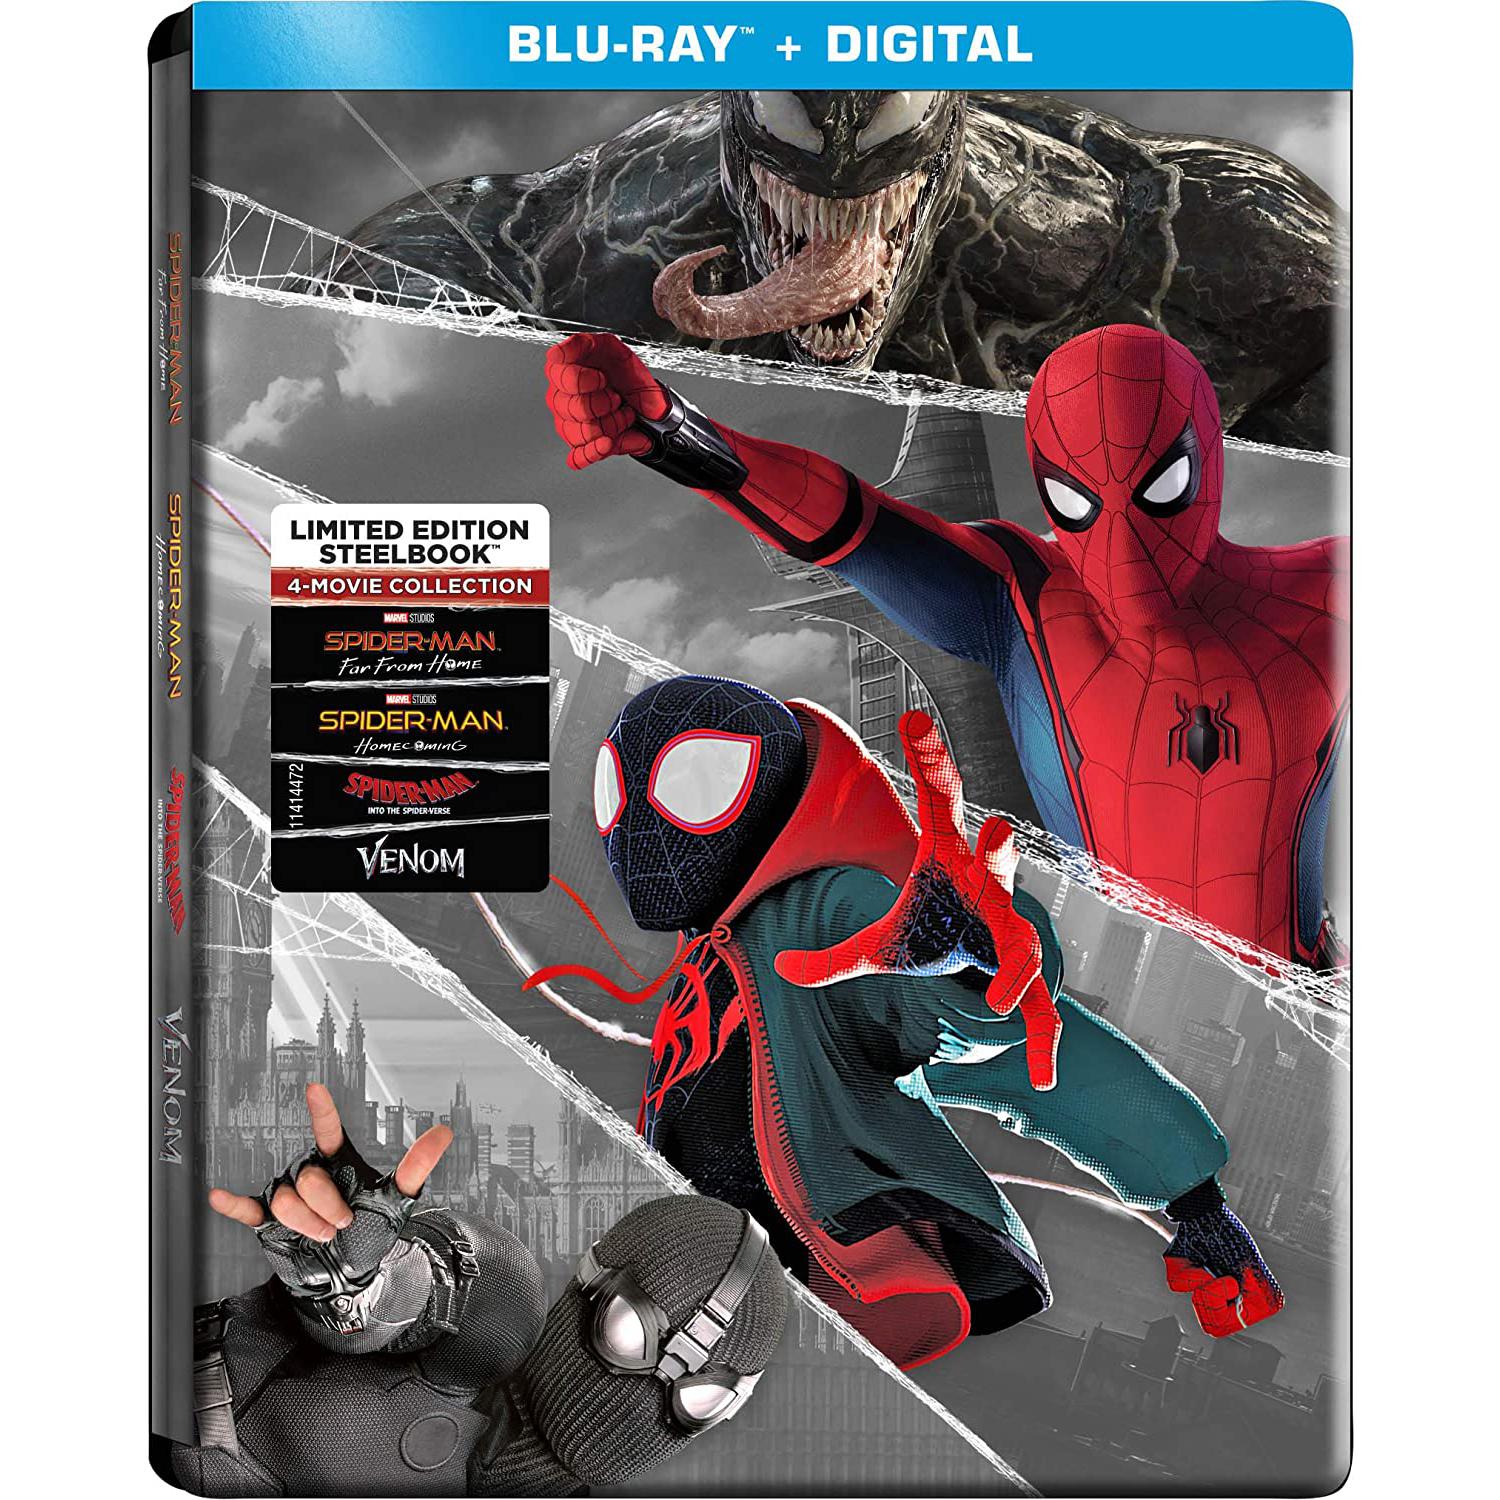 Spider-Man 4-Movie Collection Blu-ray Steelbook for $17.99